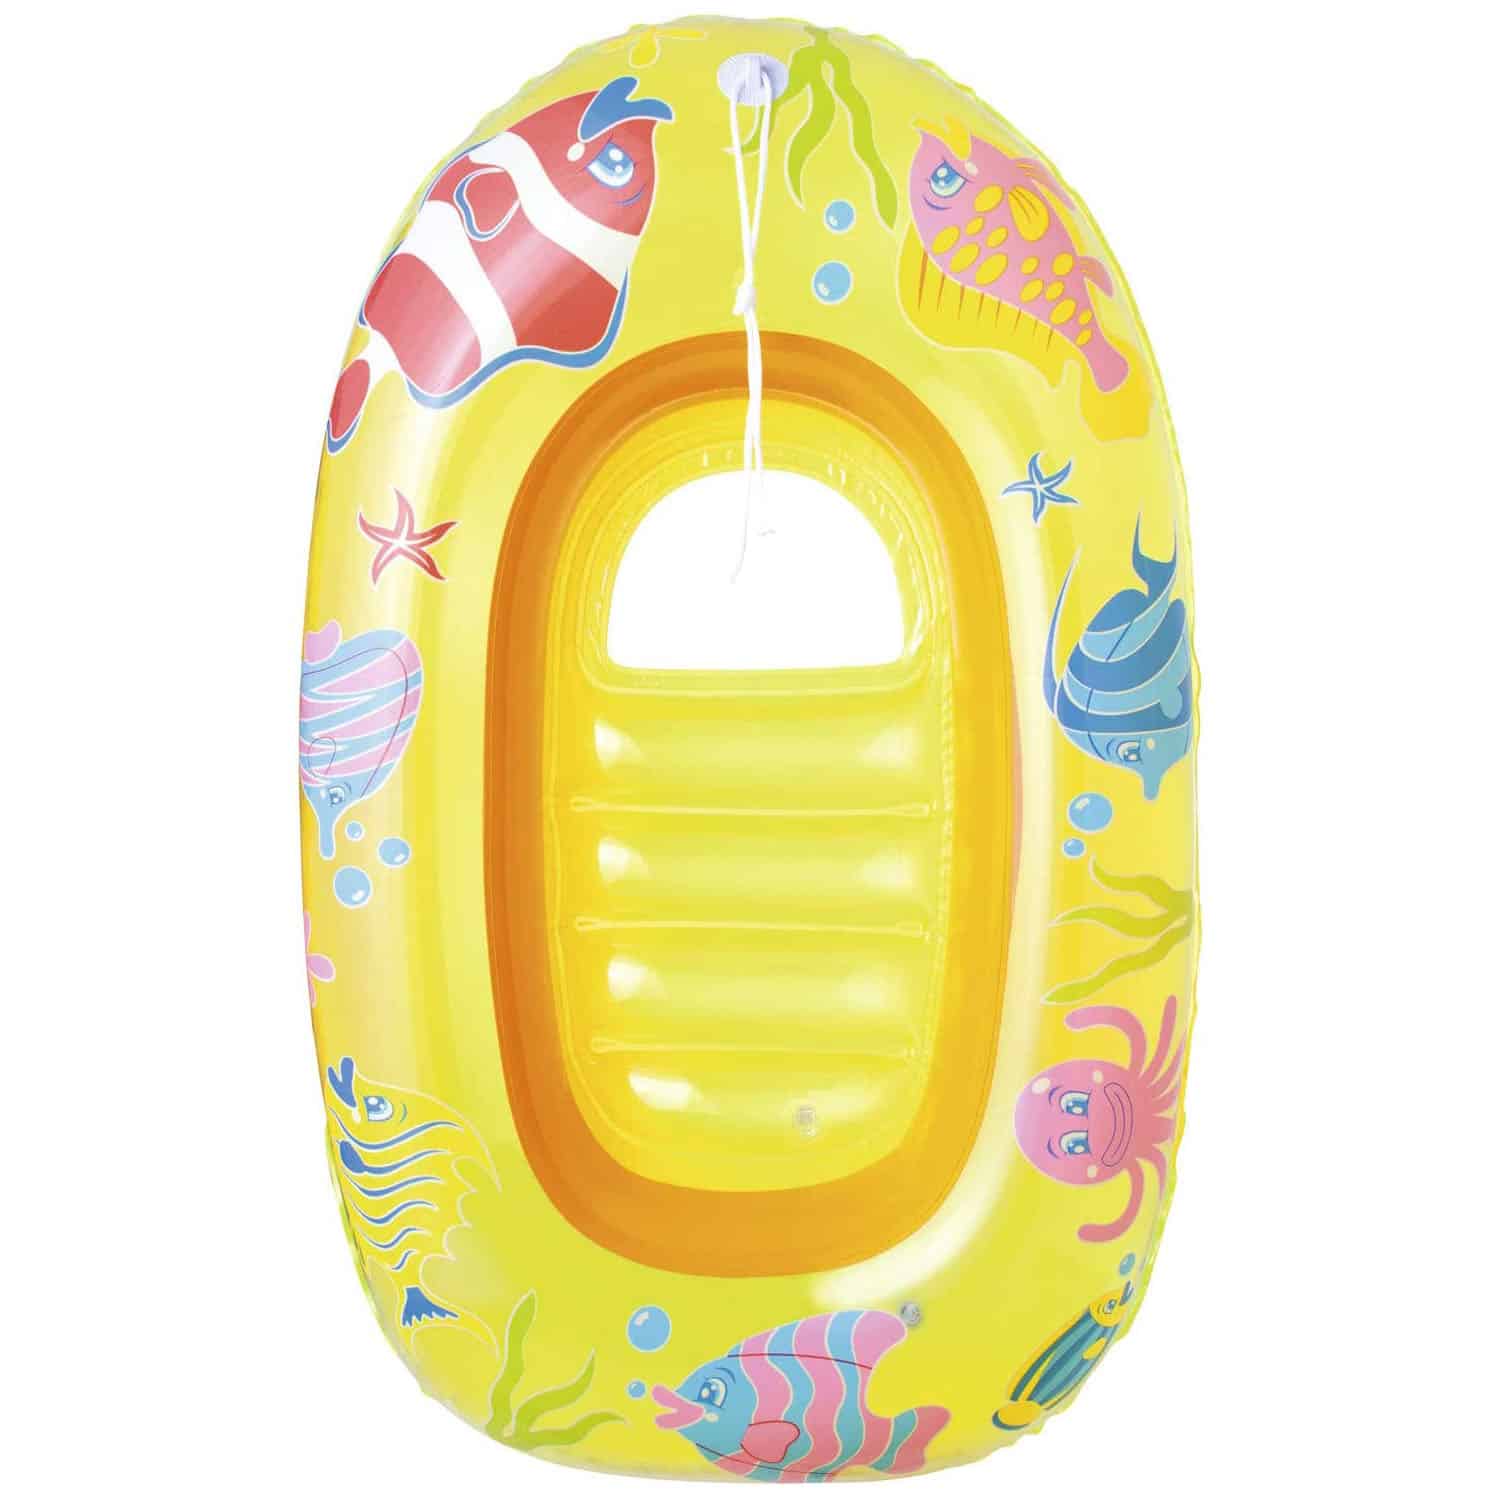 Bestway Children’s Boat with Little Fishes 34036 Yellow